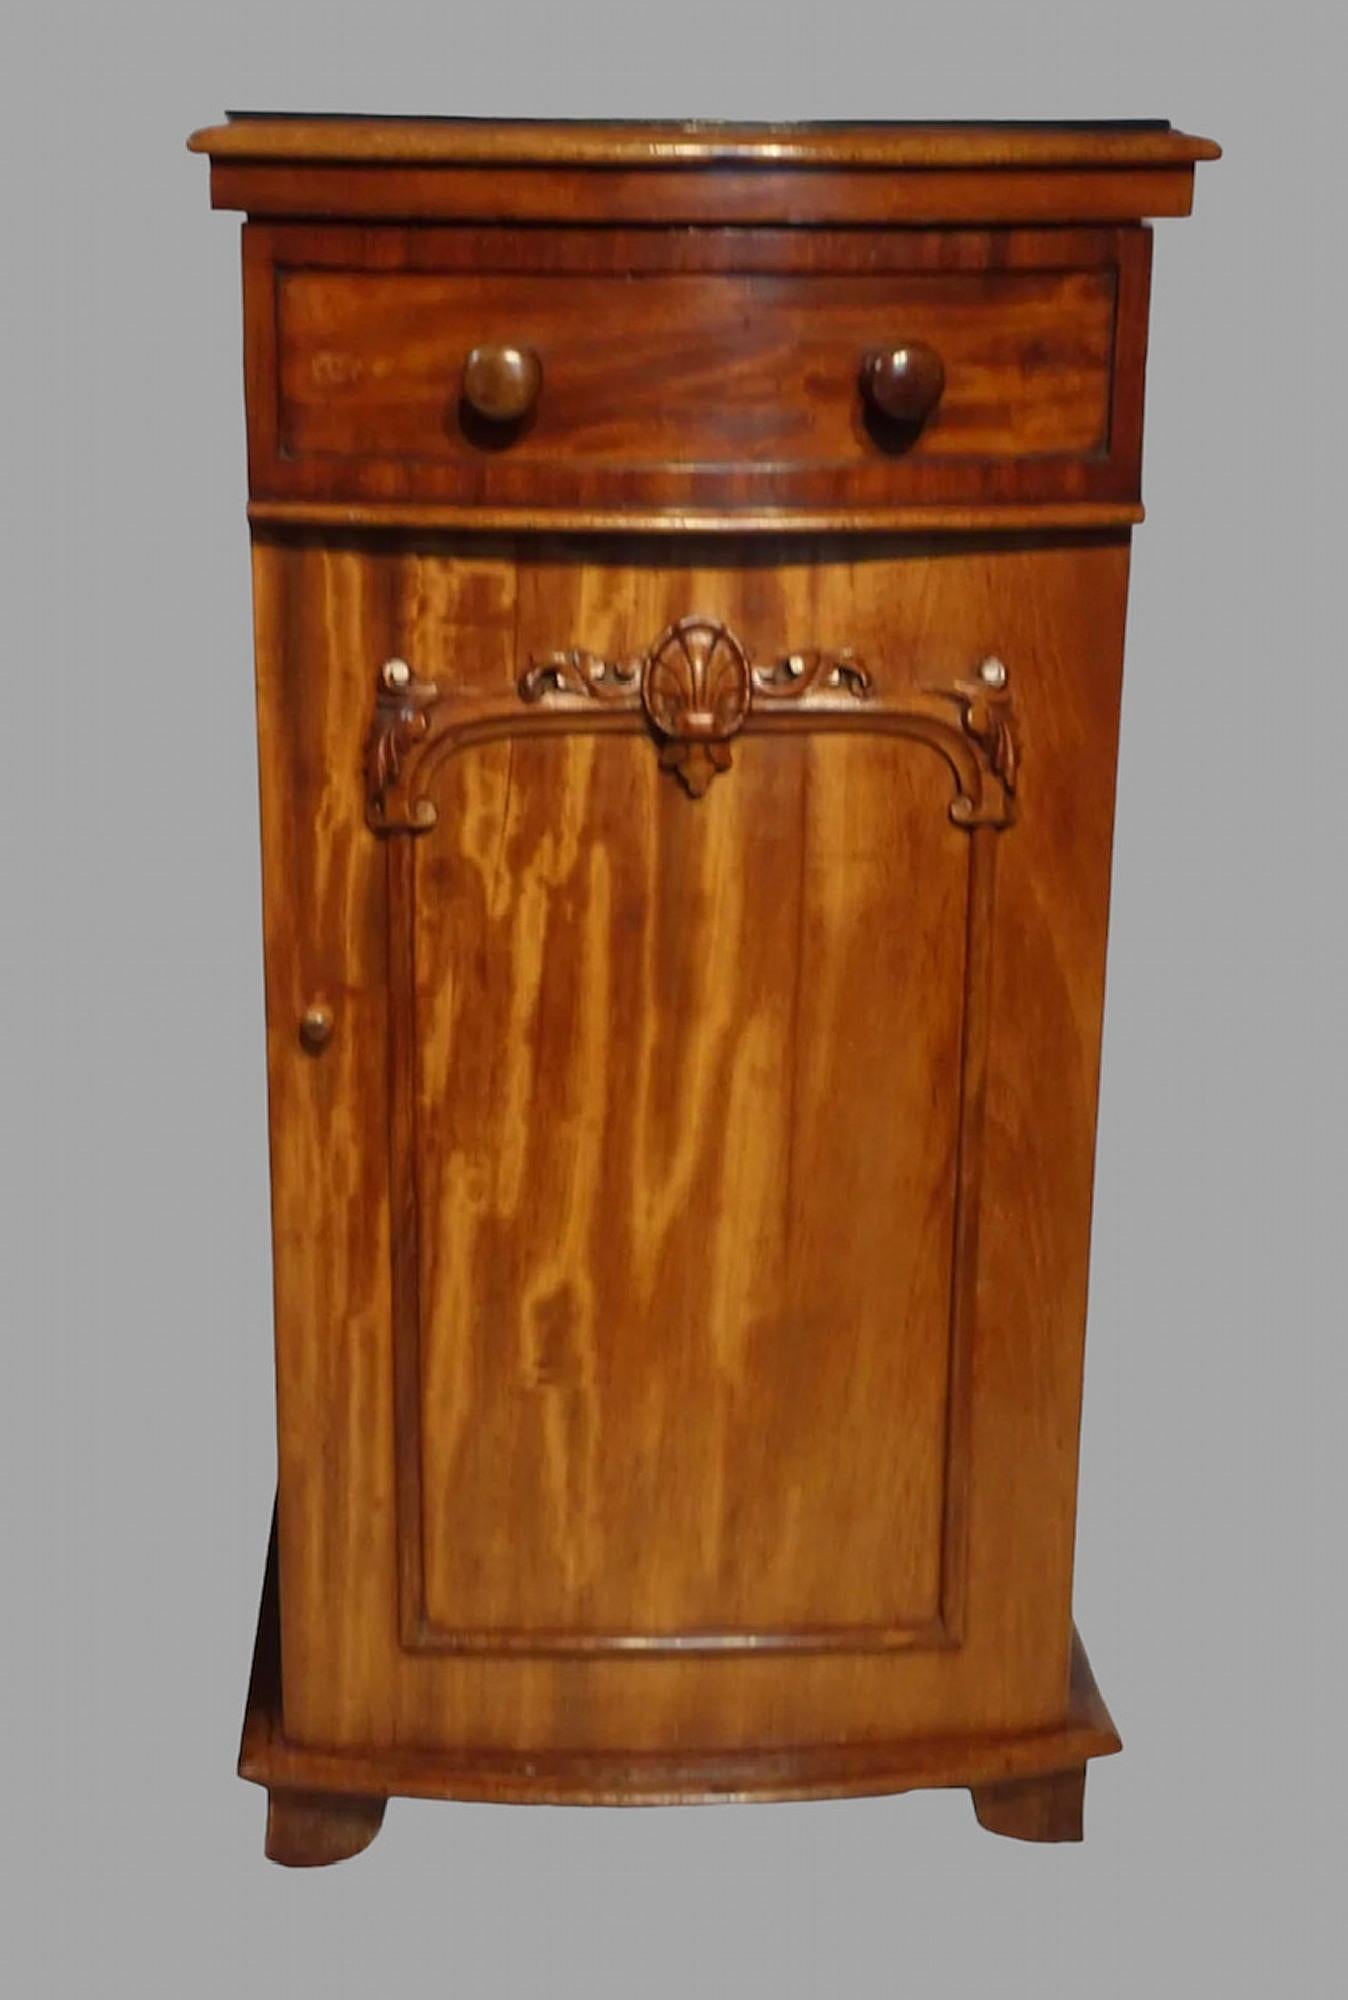 Pair of Regency Mahogany Bedside Cabinets In Good Condition For Sale In Pewsey, GB